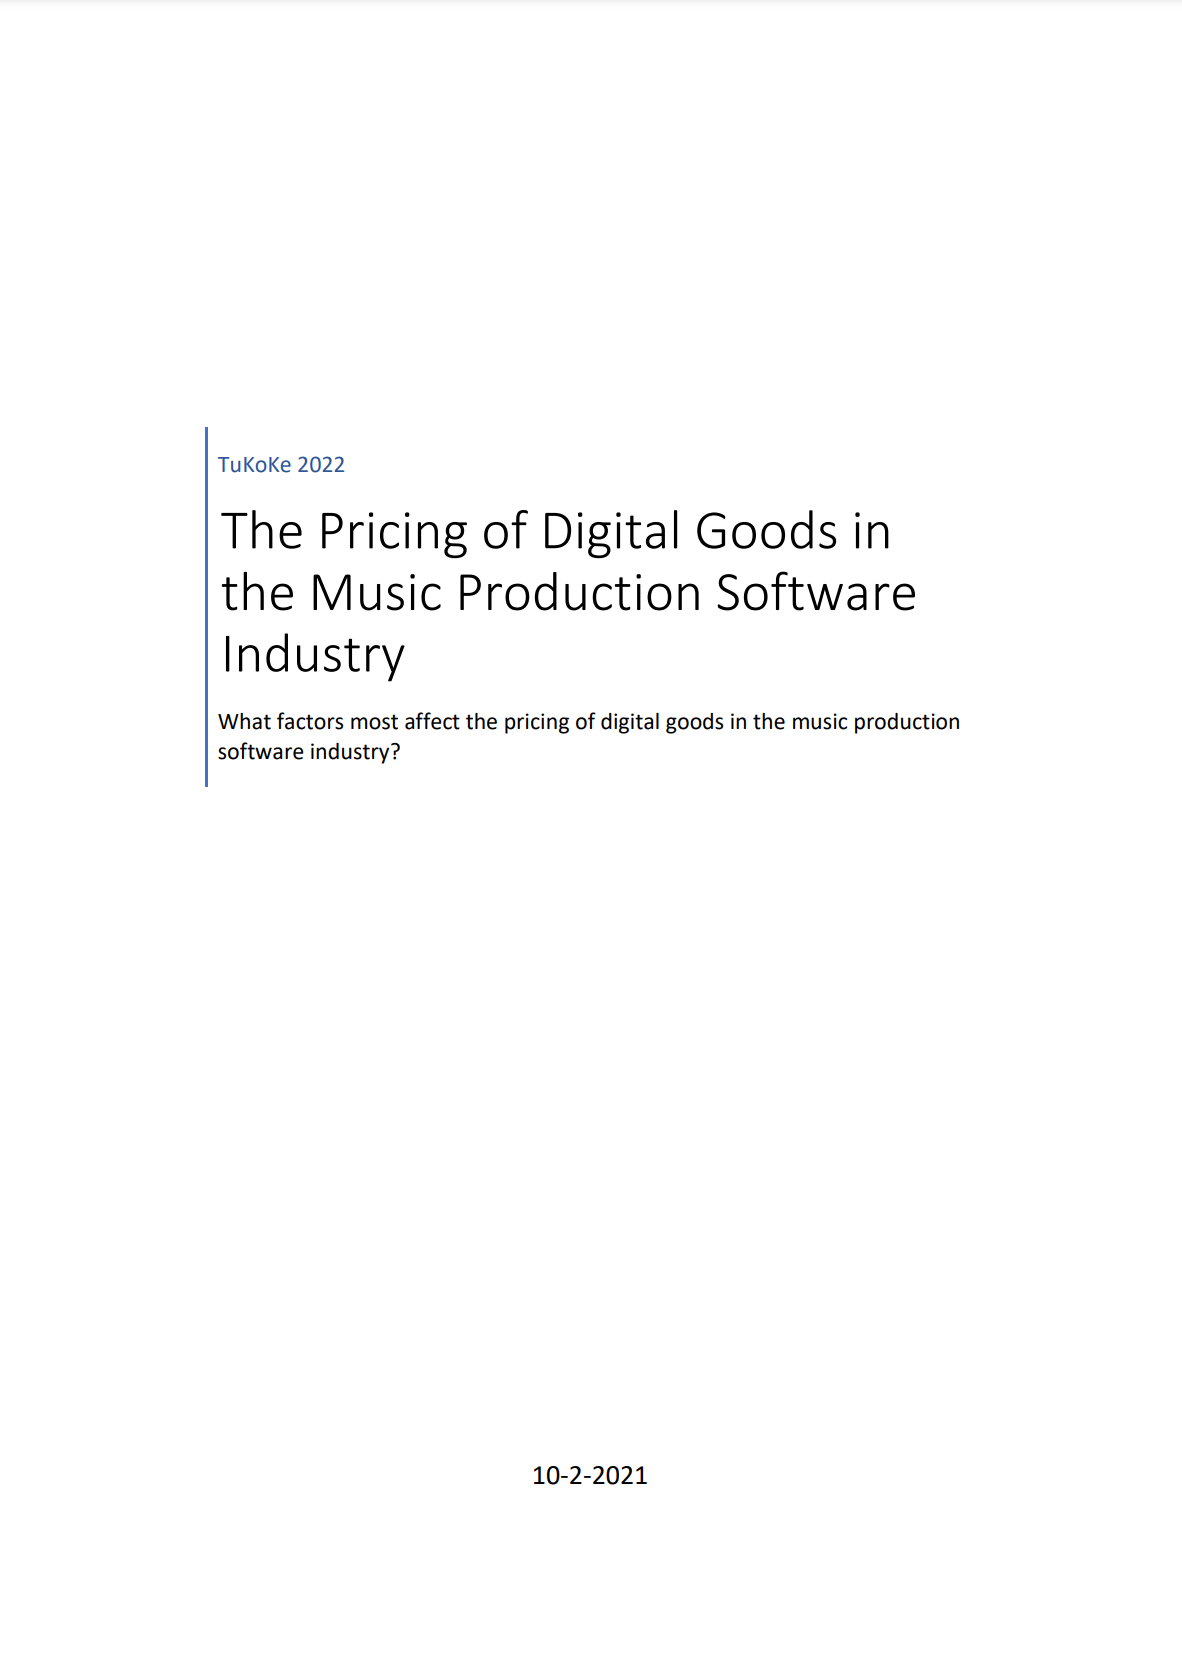 The Pricing of Digital Goods in the Music Production Software Industry - Report for TuKoKe document